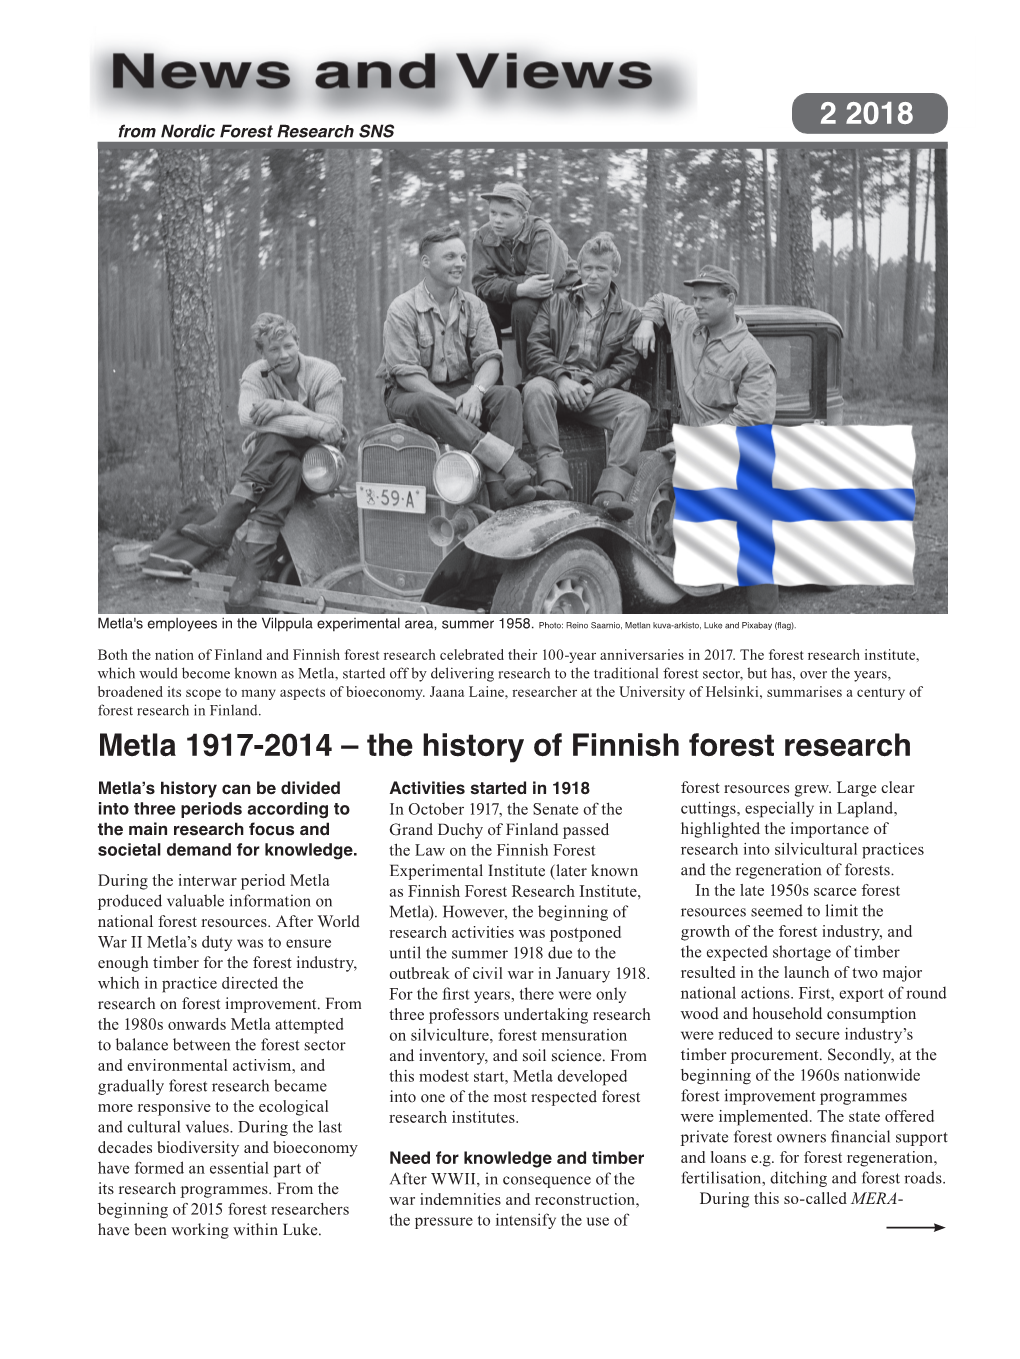 2 2018 Metla 1917-2014 – the History of Finnish Forest Research